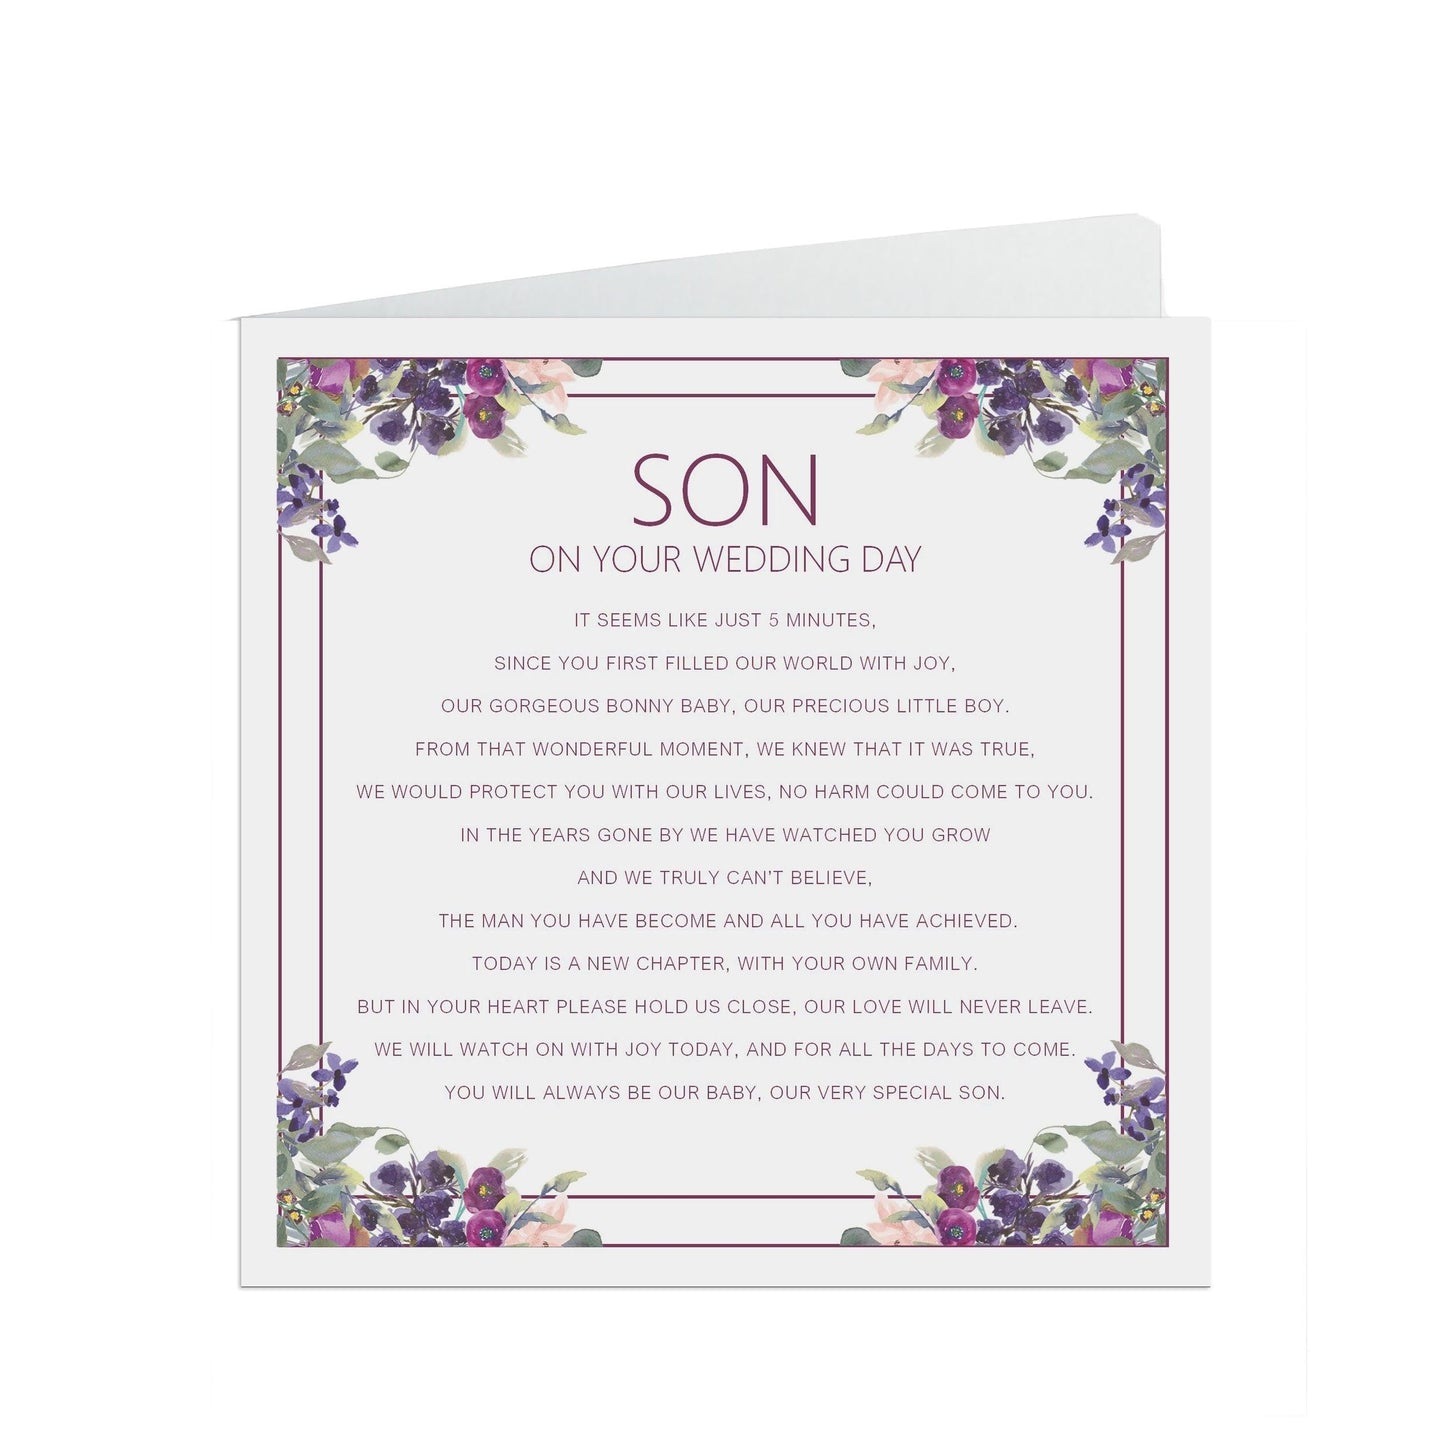  Son On Your Wedding Day Card, Purple Floral Design 6x6 Inches With A Kraft Envelope by PMPRINTED 